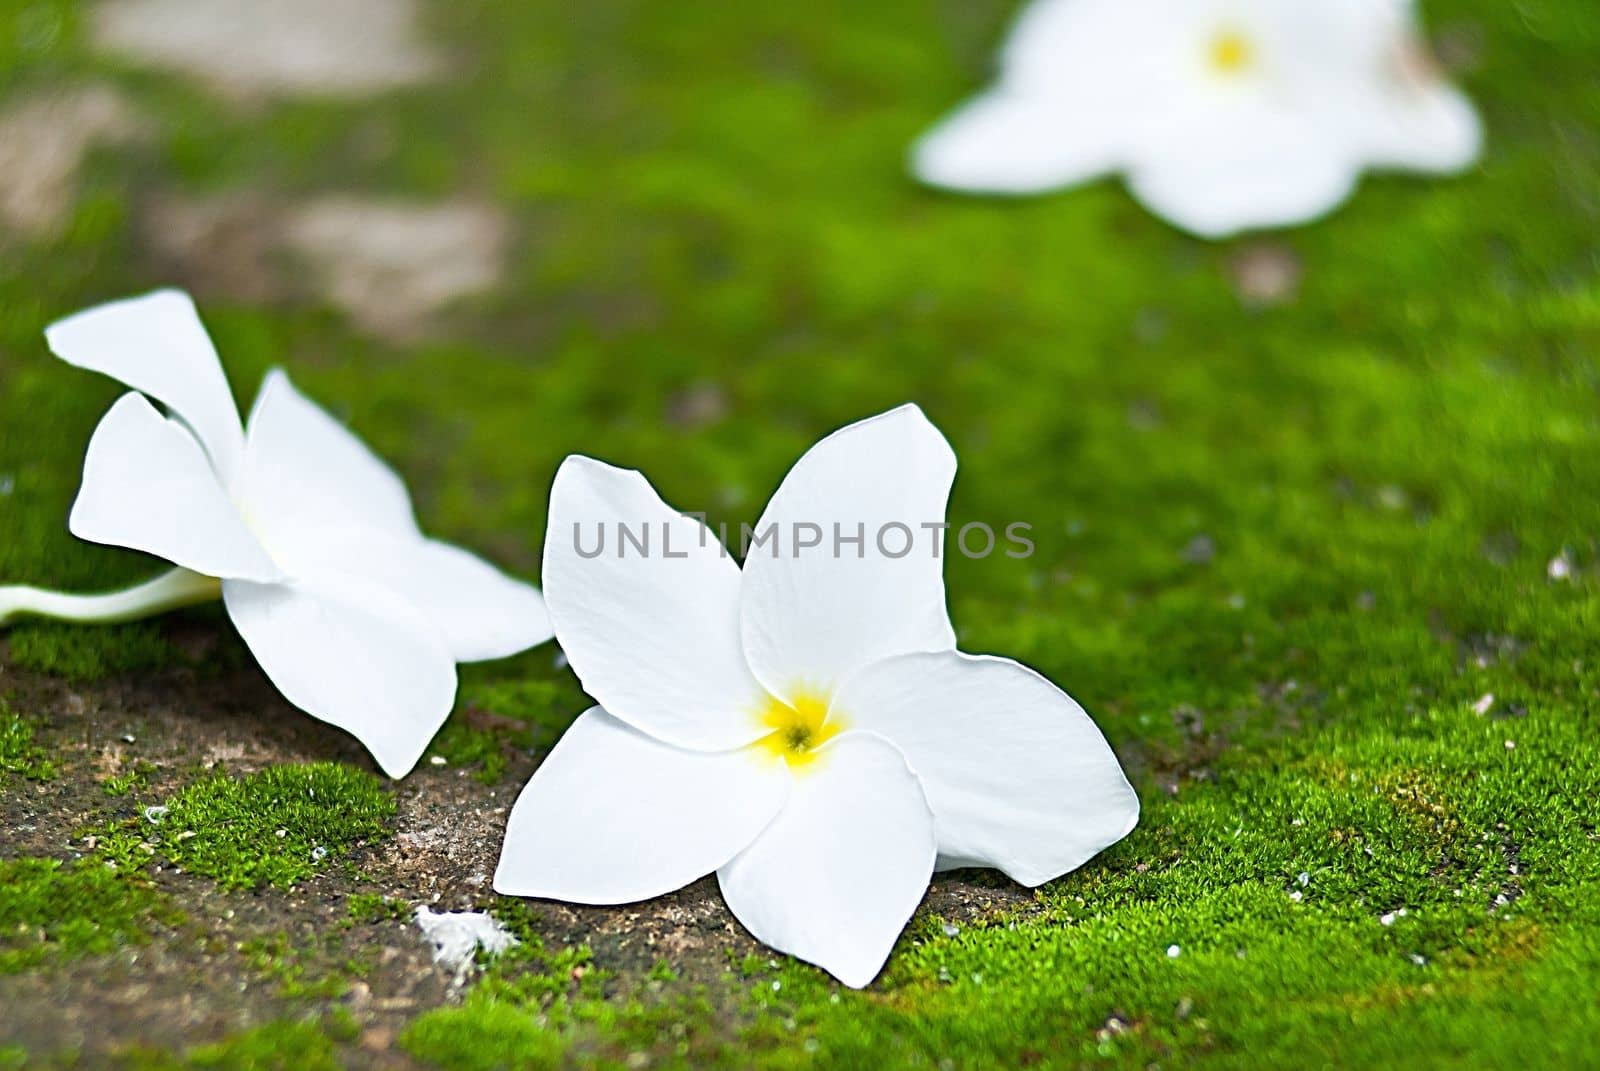 photo of white wild flowers, close-up with blur background